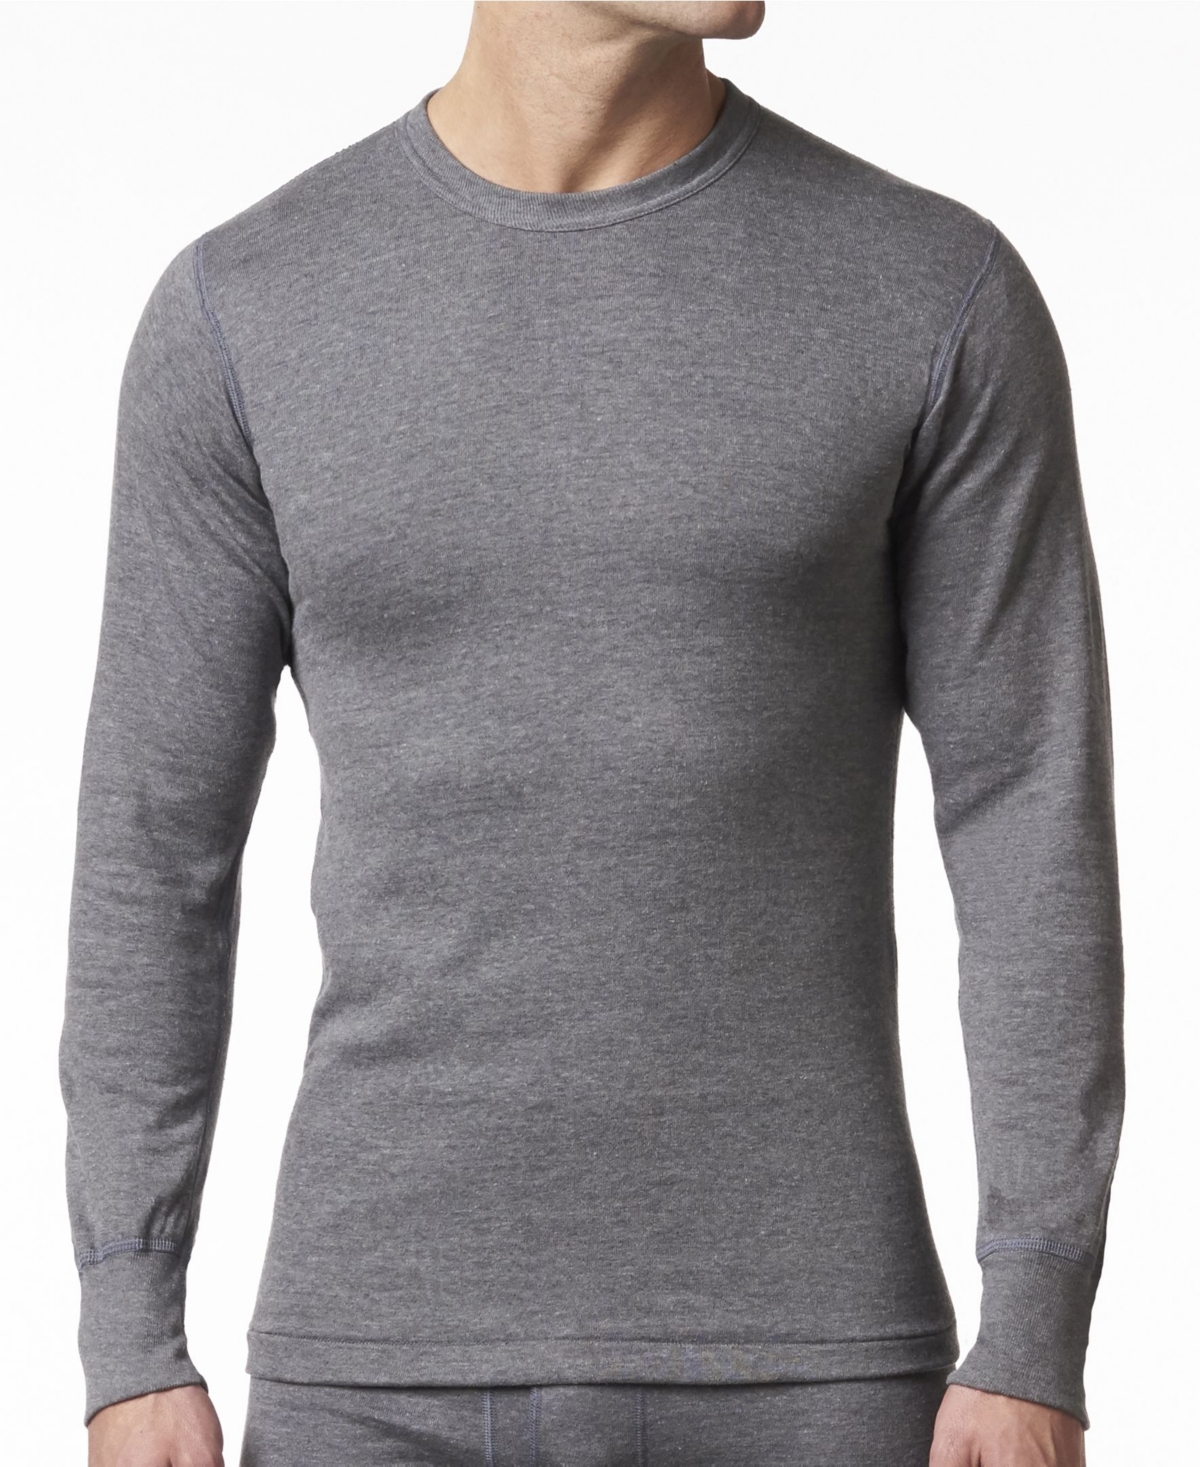 Men's 2 Layer Cotton Blend Thermal Long Sleeve Shirt - Charcoal